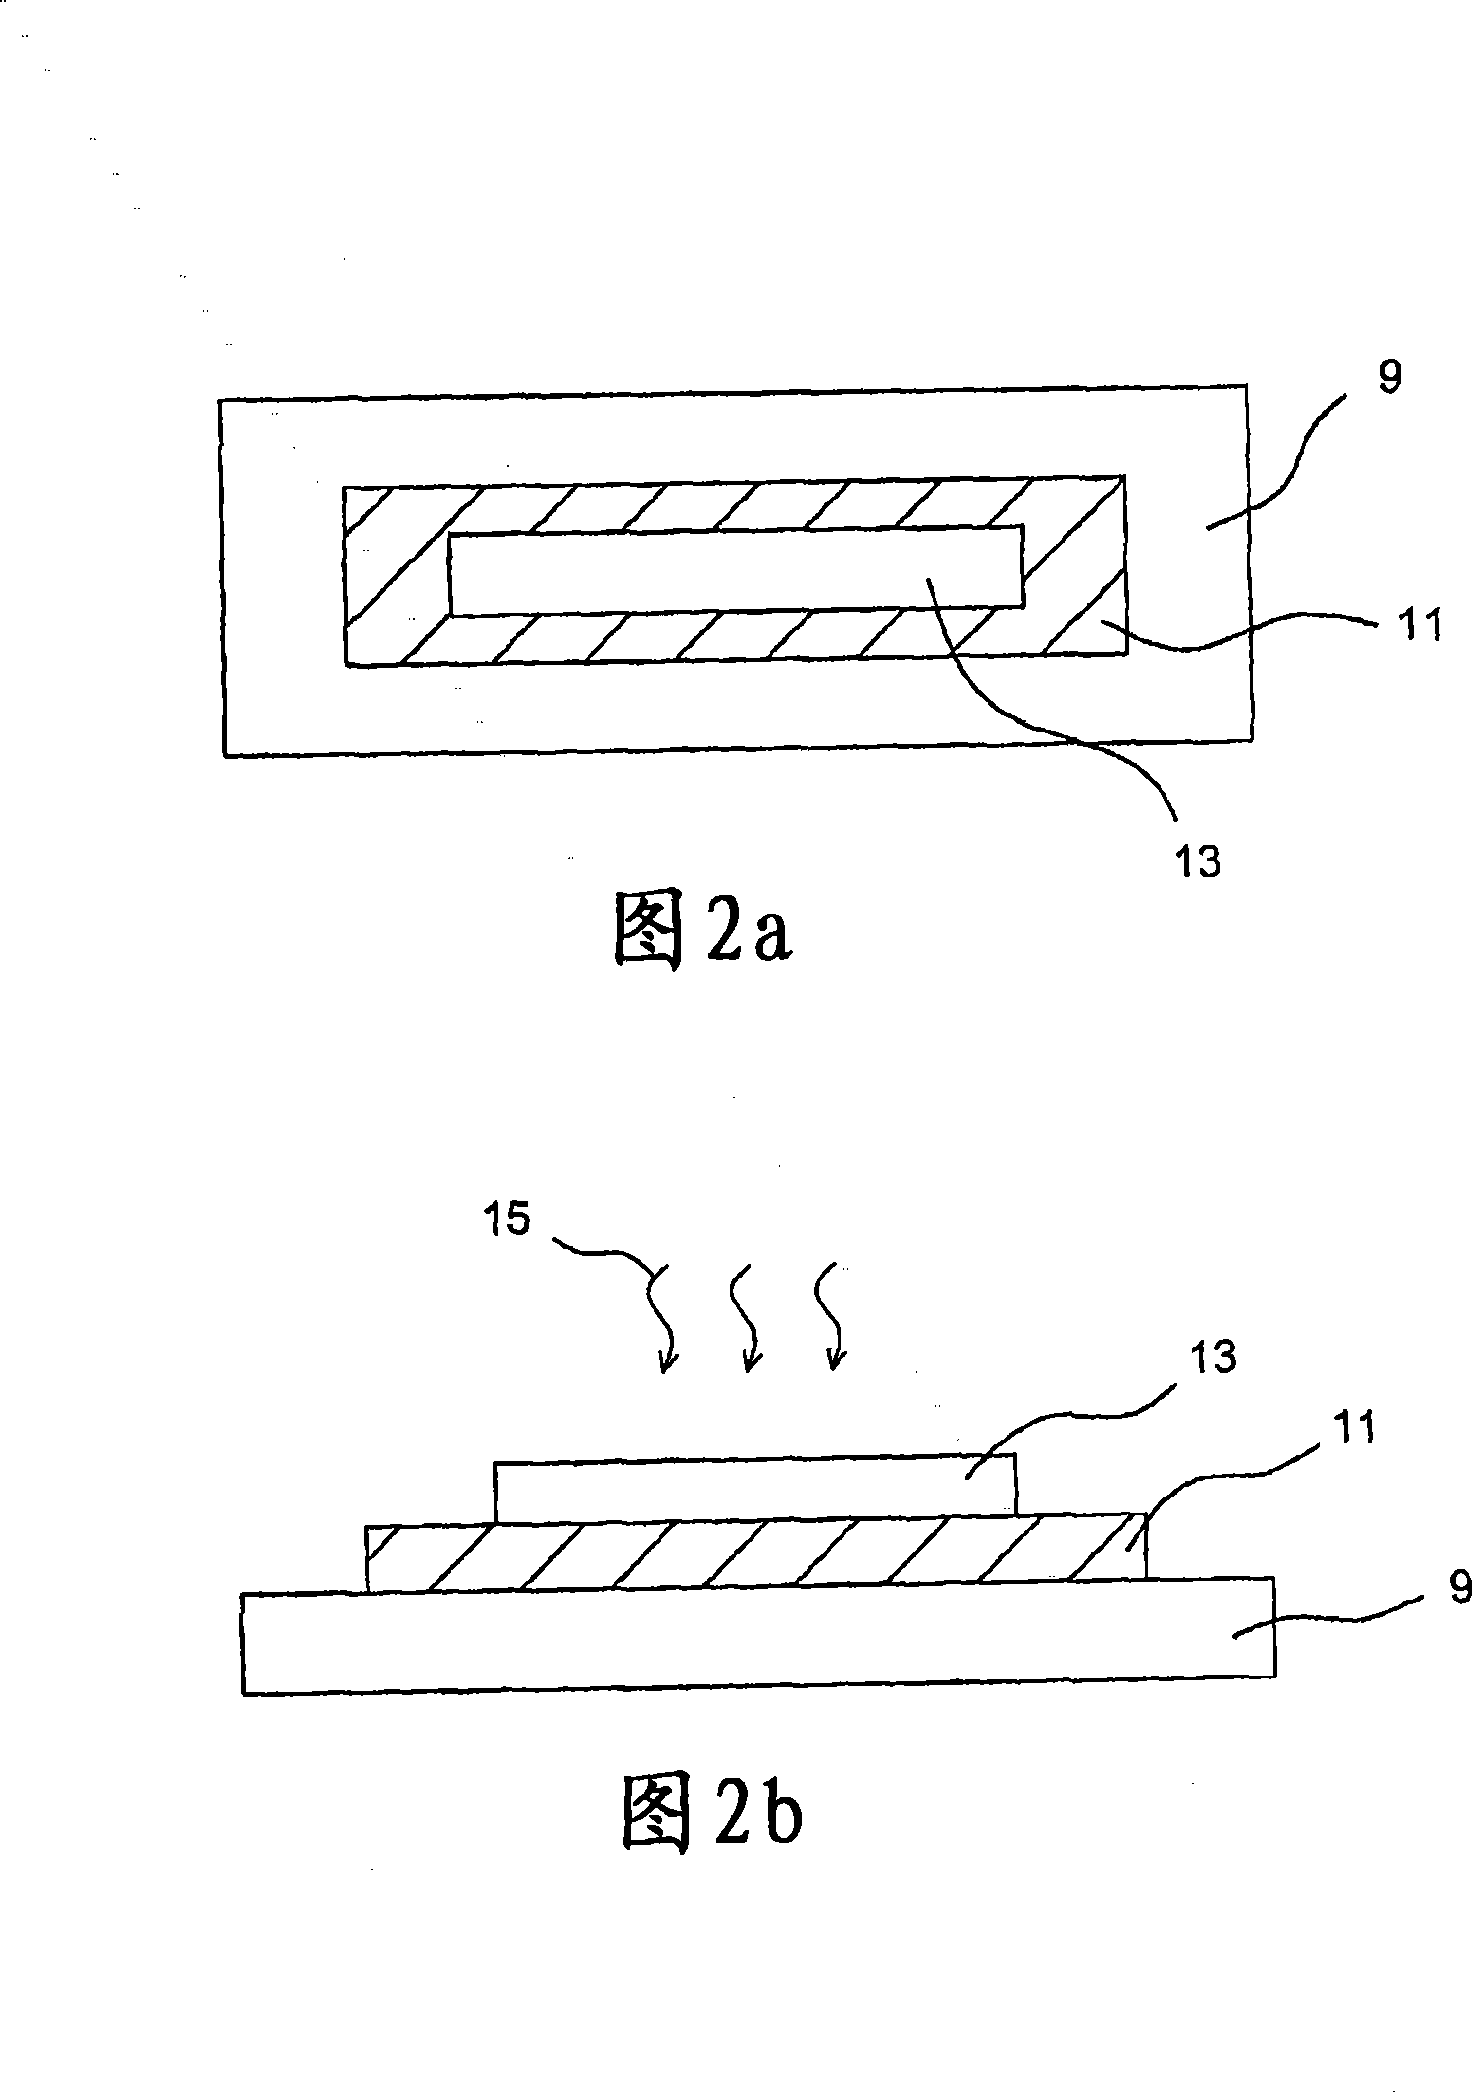 Semiconductor materials and methods of producing them